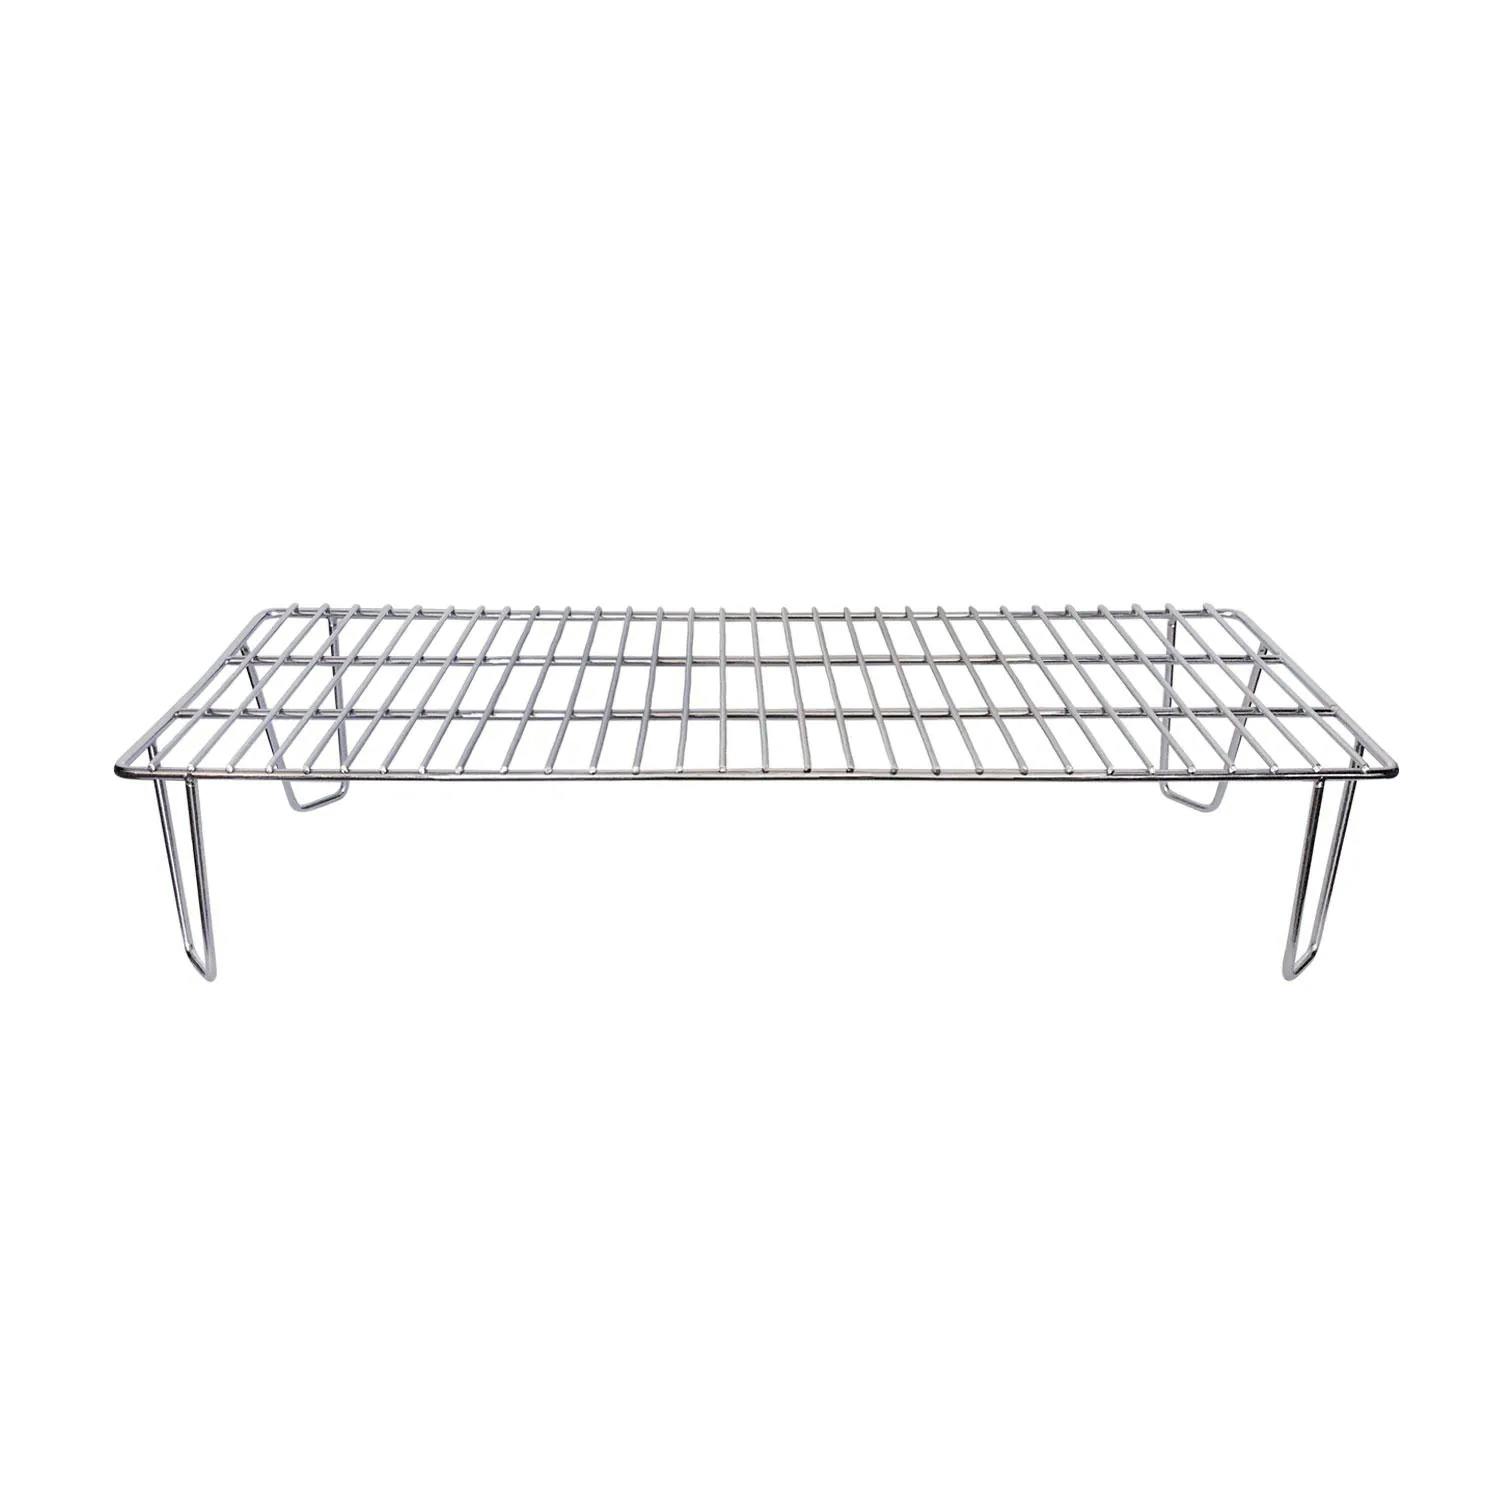 Green Mountain Grills Upper Rack For Ledge & Daniel Boone Grills · 22 in.